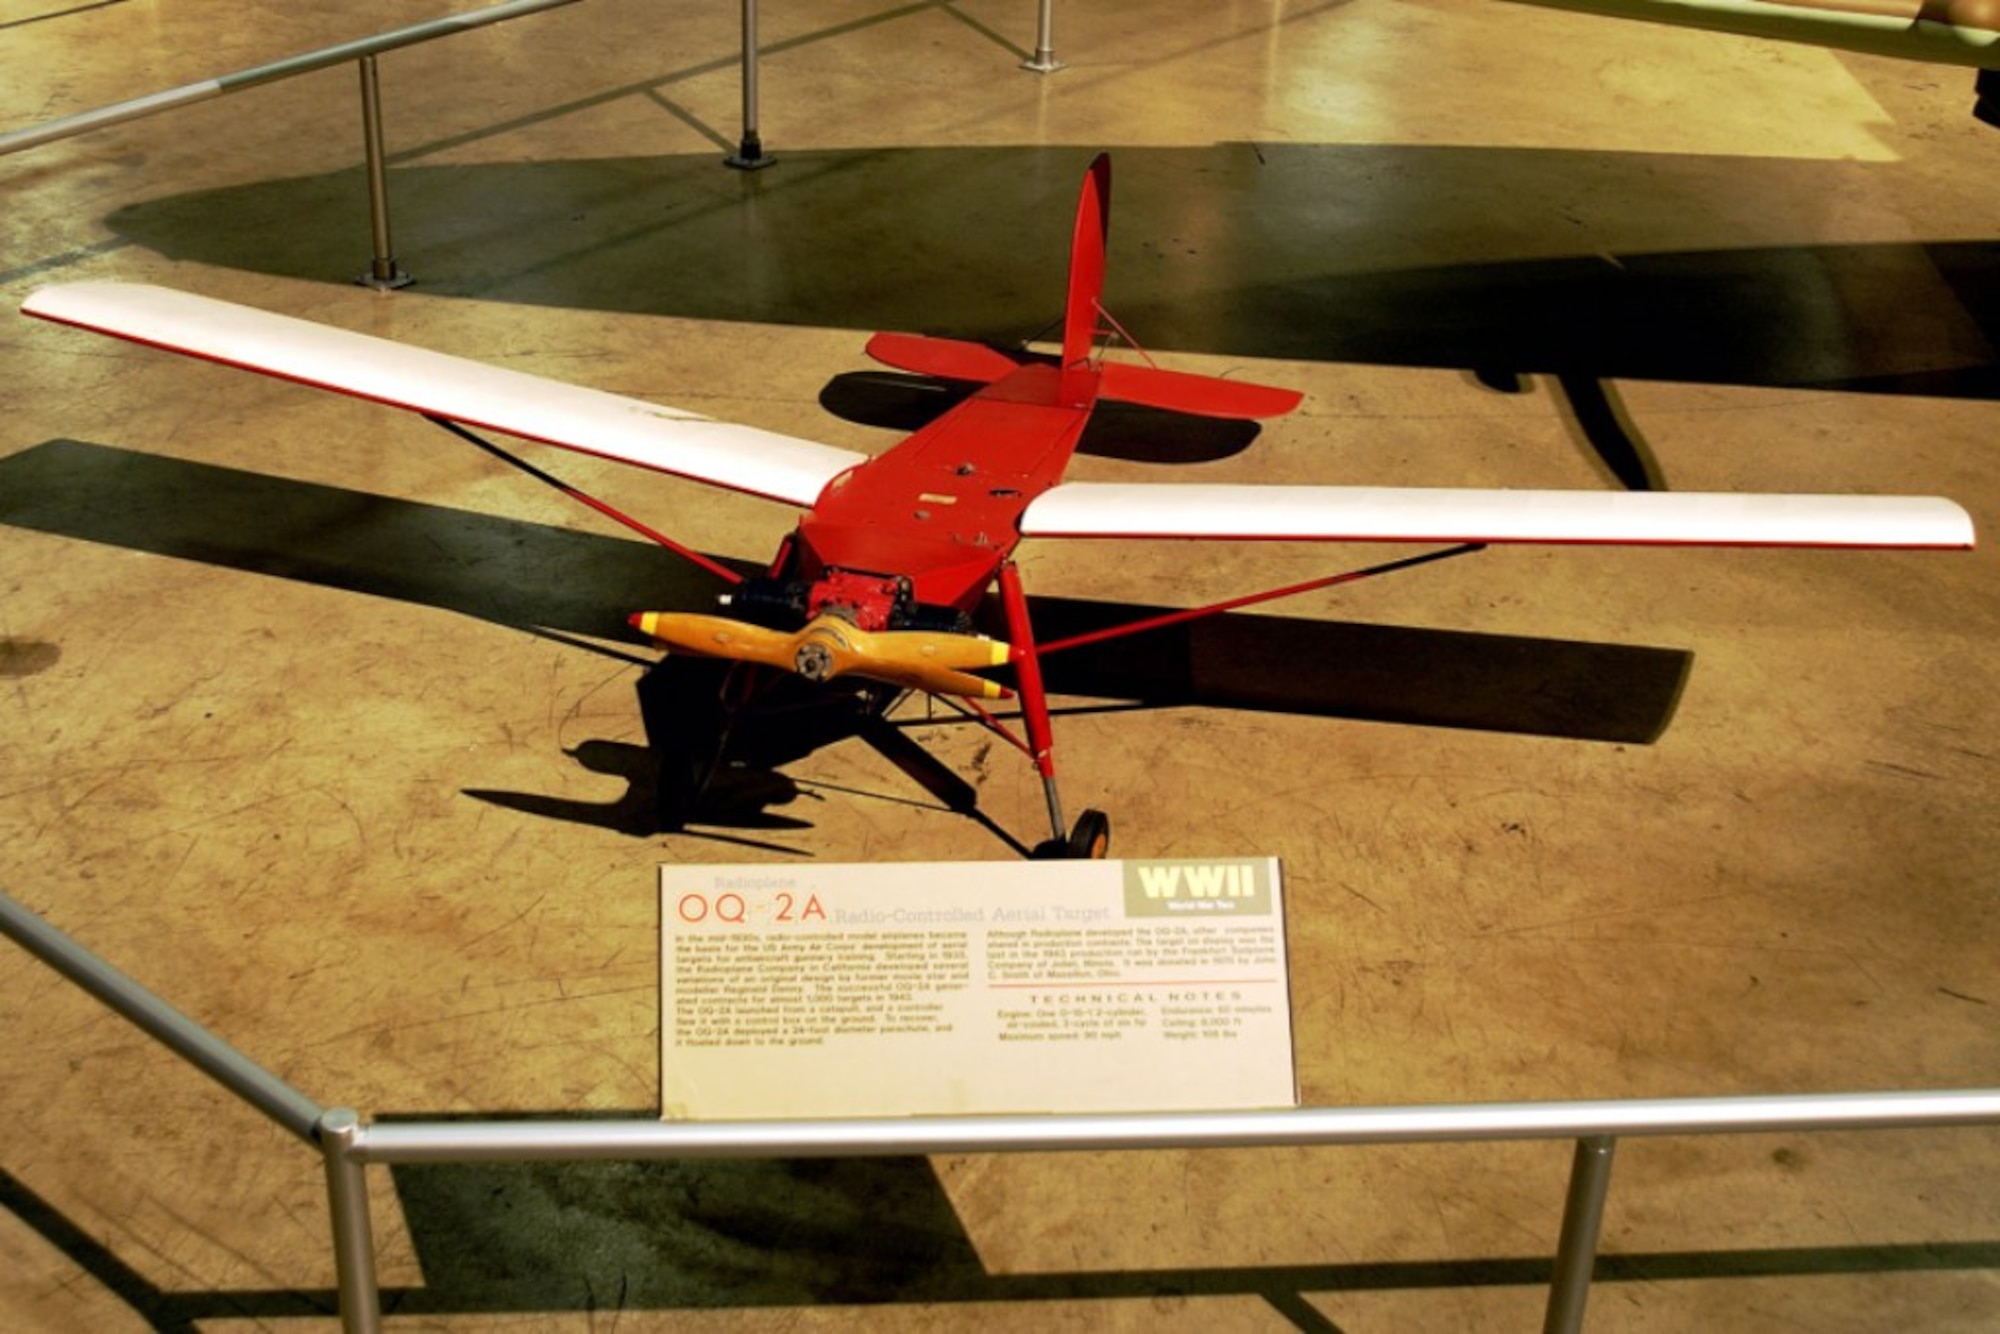 The QQ-2A Radioplane is on display in the World War II Gallery at the National Museum of the U.S. Air Force in Dayton, Ohio.  In the mid-1930s, radio-controlled model airplanes became the basis for the U.S. Army Air Corps' development of the aerial targets for antiaircraft gunnery training. (Photo courtesy of U.S. Air Force)